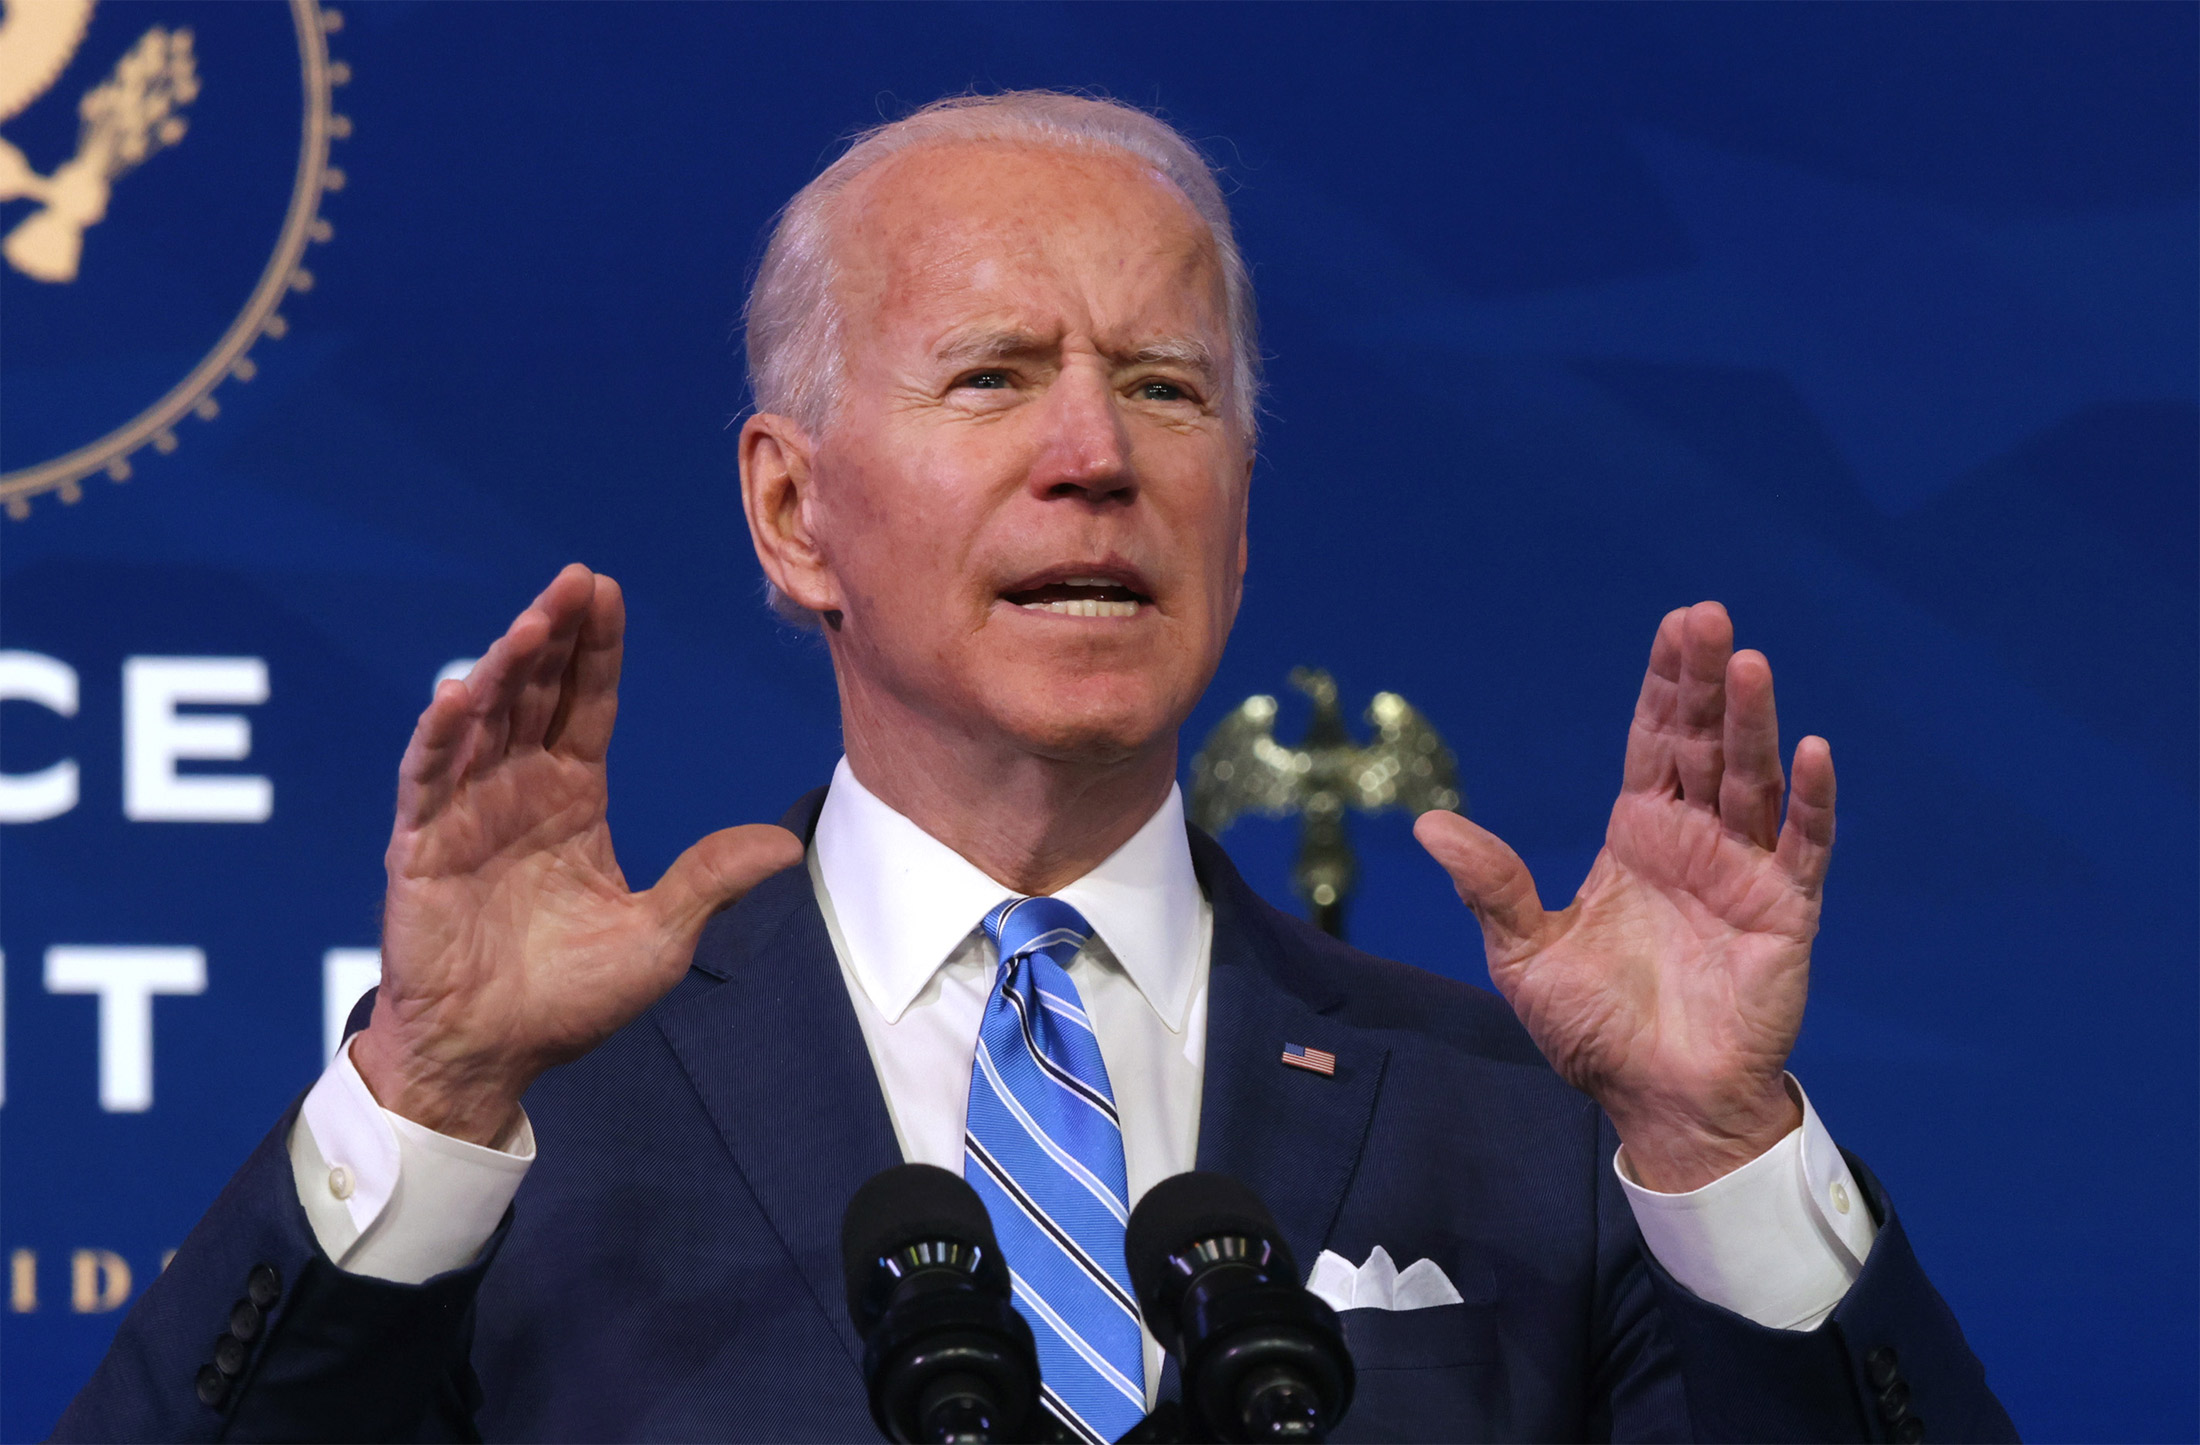 Biden Plans 10 Days of Action on Four 'Overlapping' Crises - Bloomberg